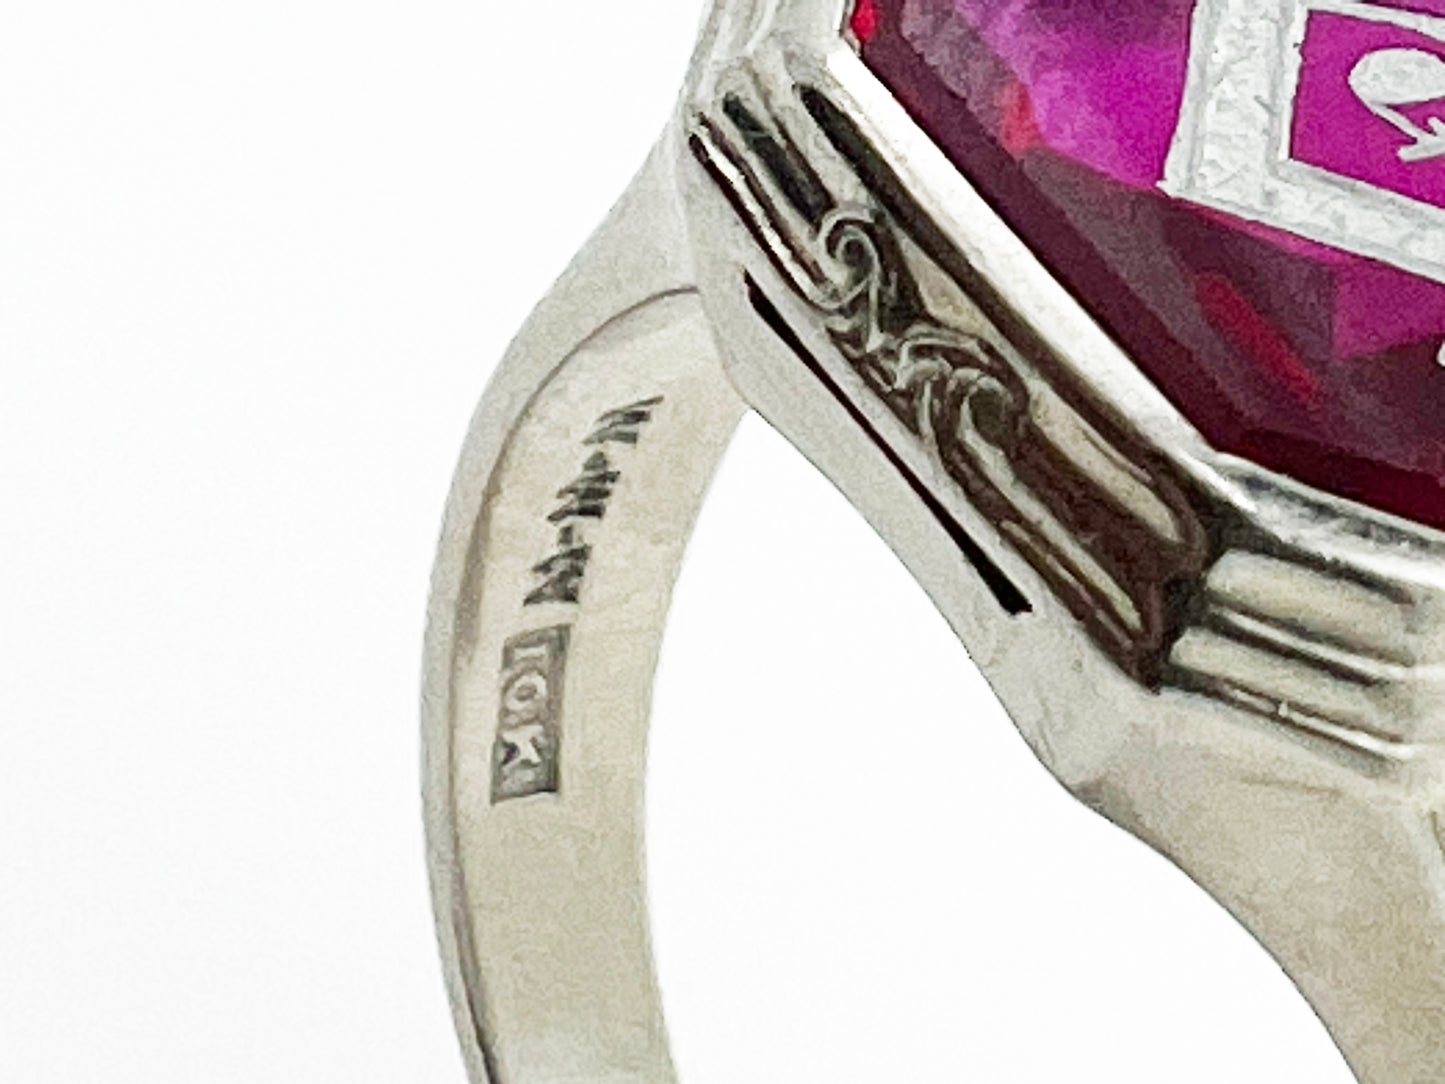 Vintage Carved Ruby Masonic Ring in 10k White Gold